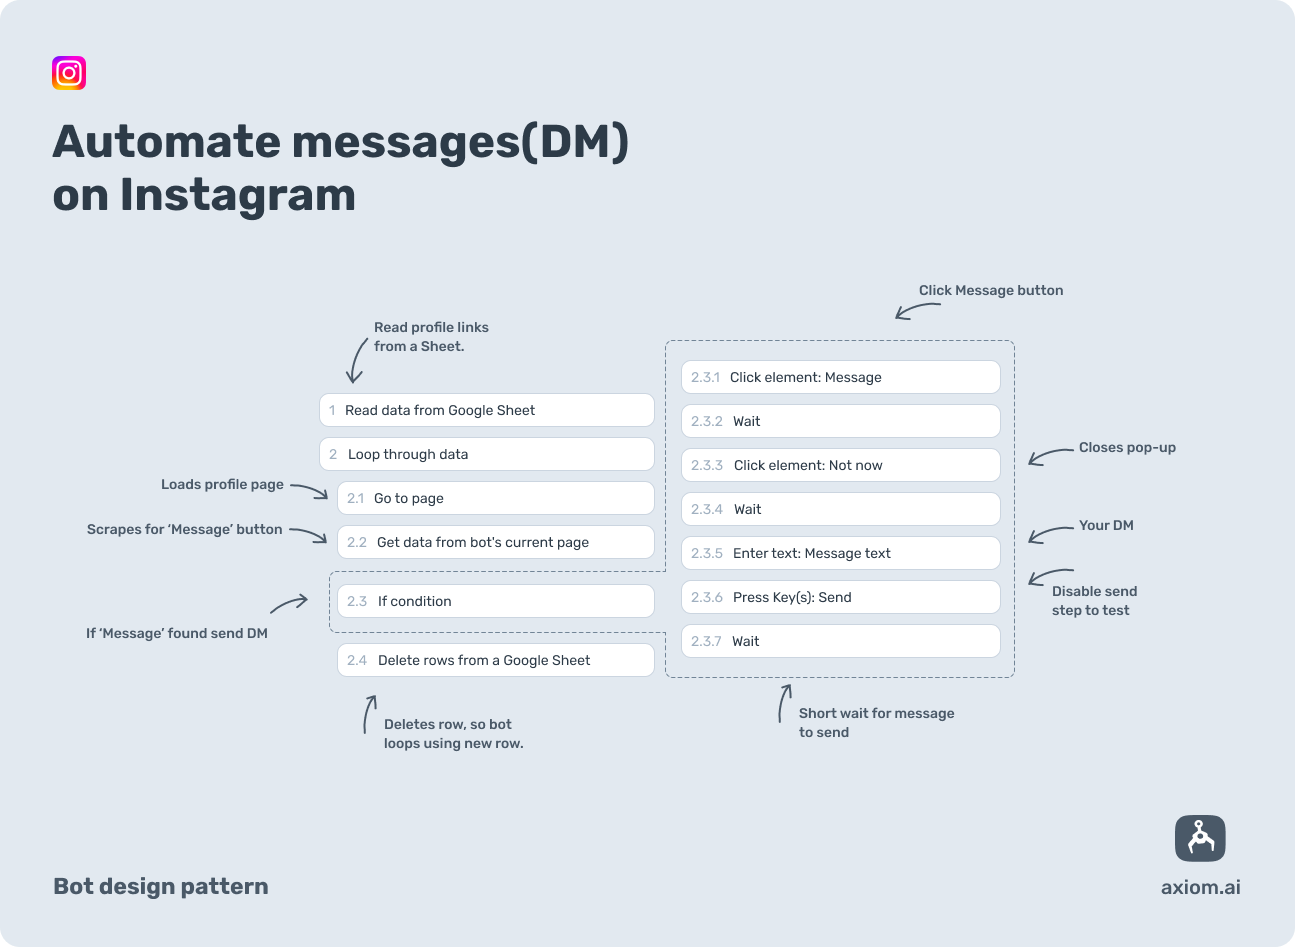 axiom.ai design pattern for automating messages in Instagram